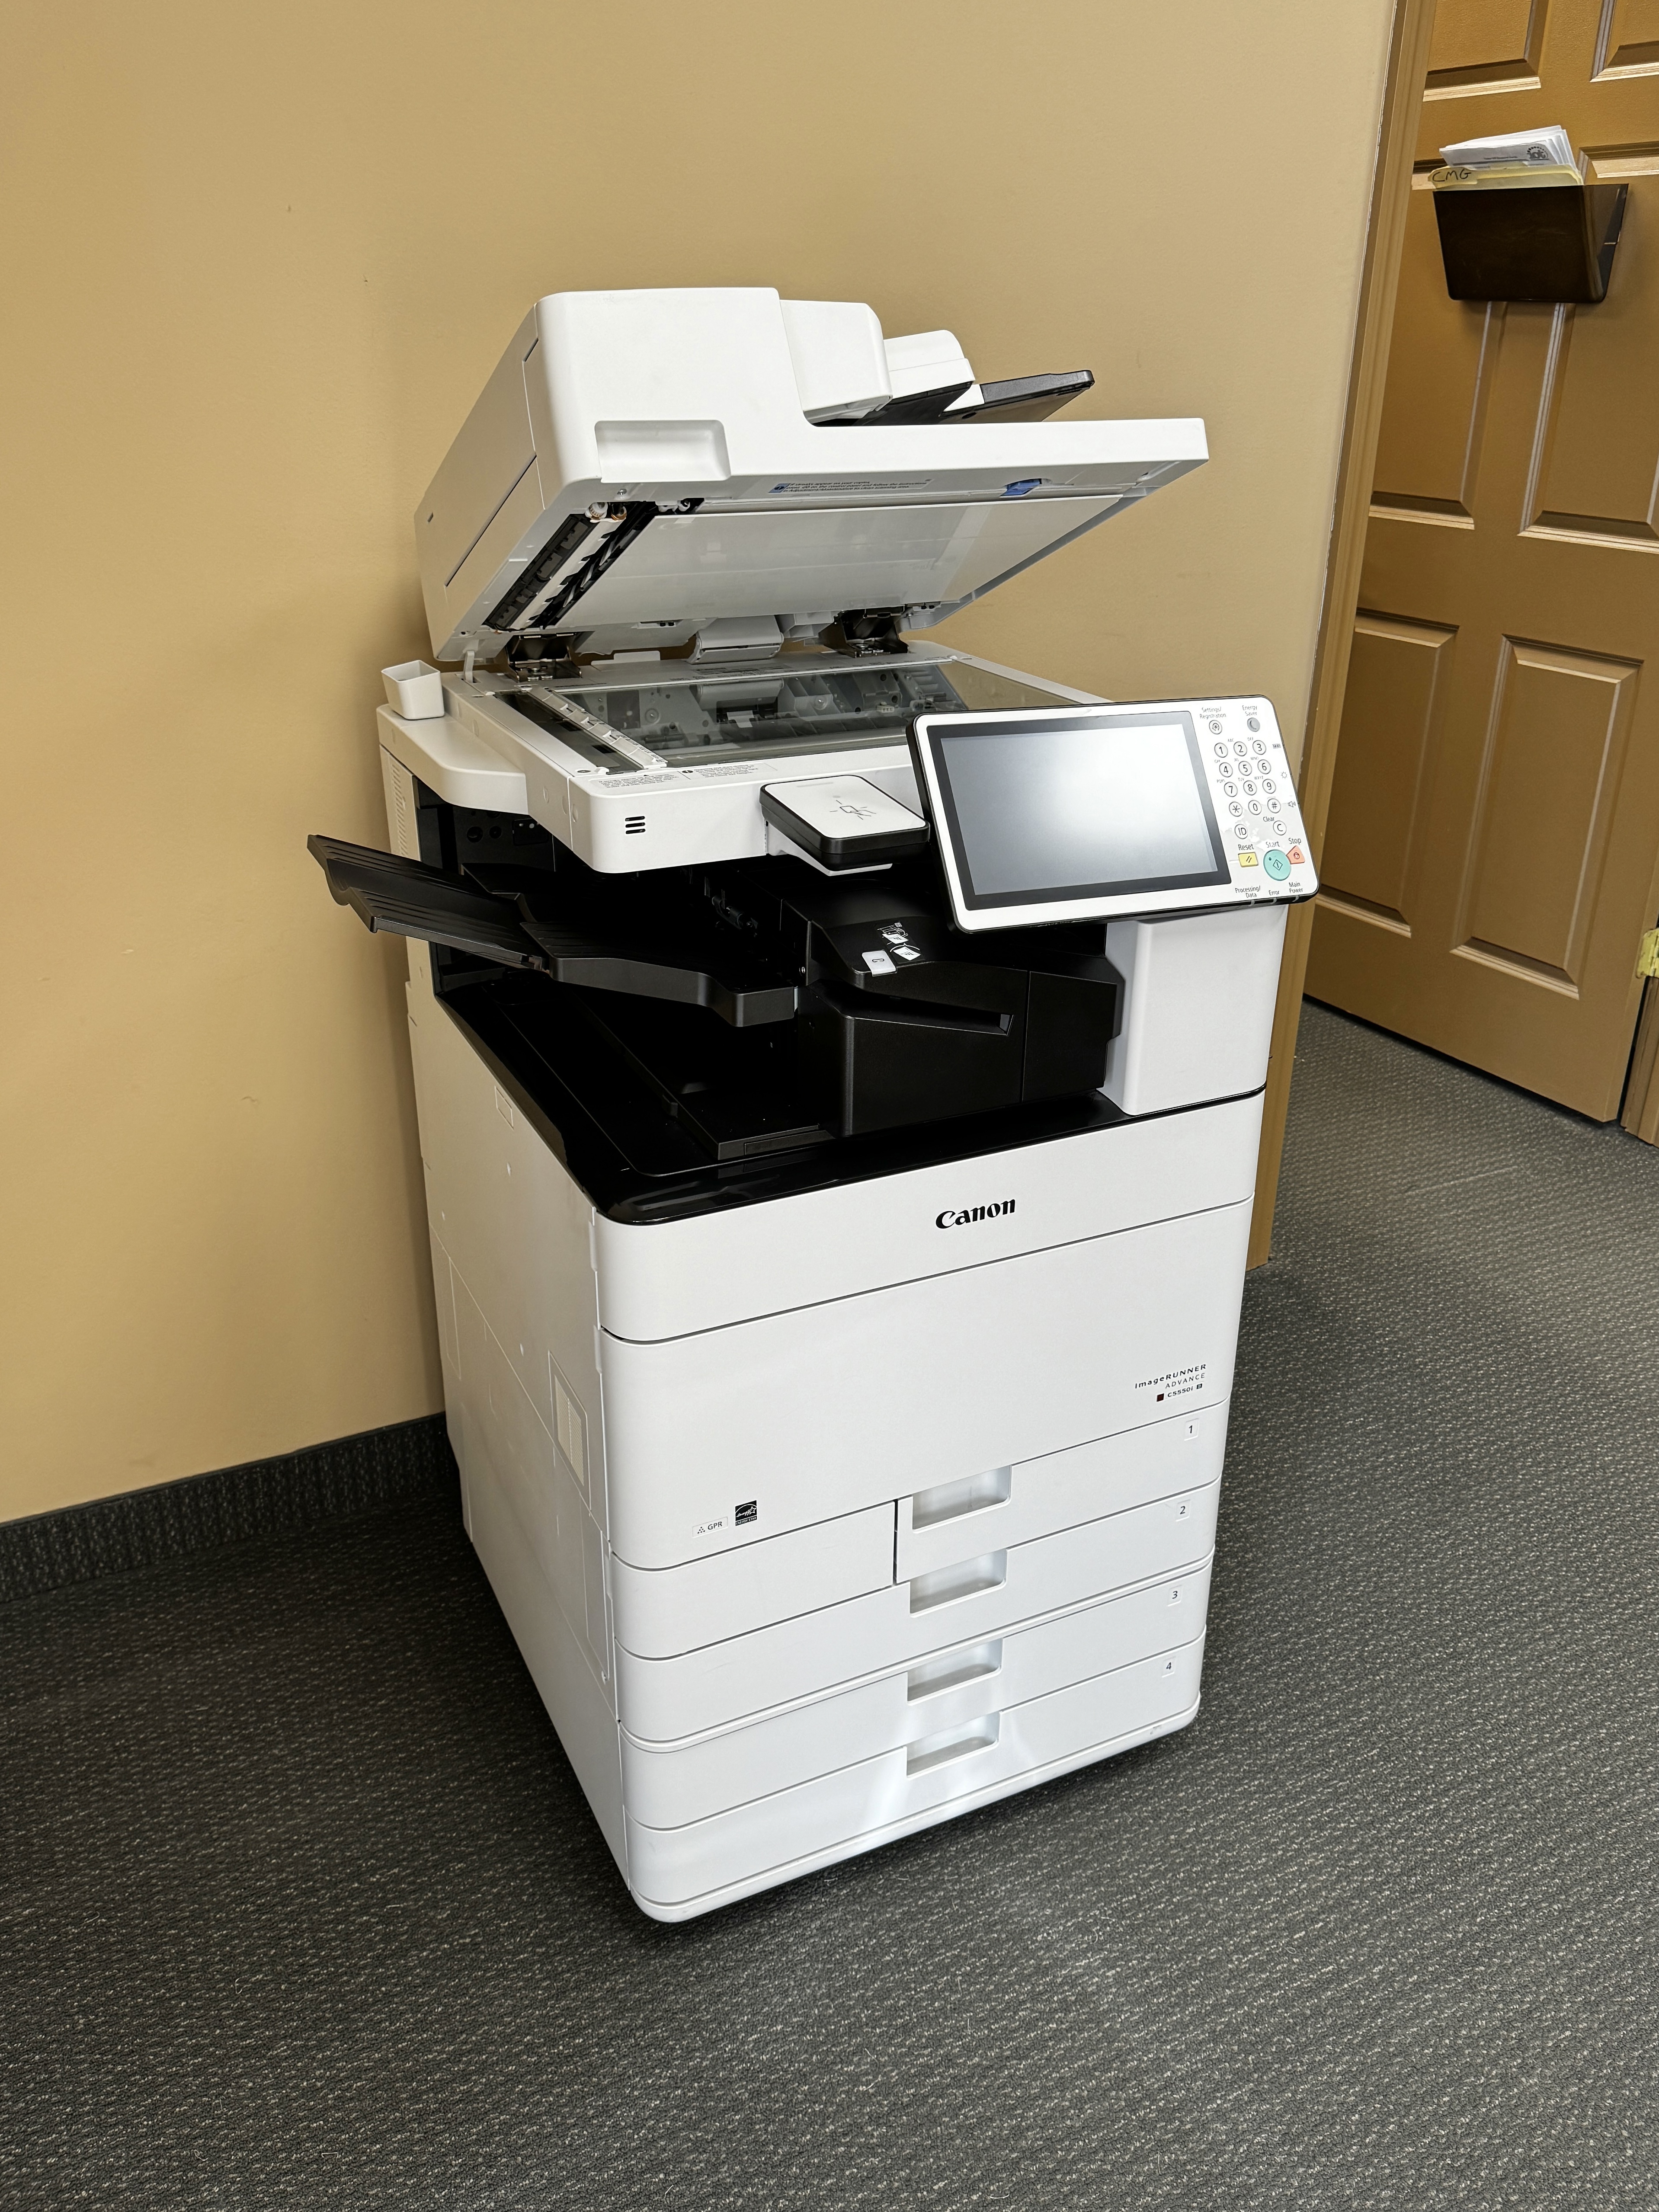 Canon Imagerunner Advance C5550ii color printer leasing. 